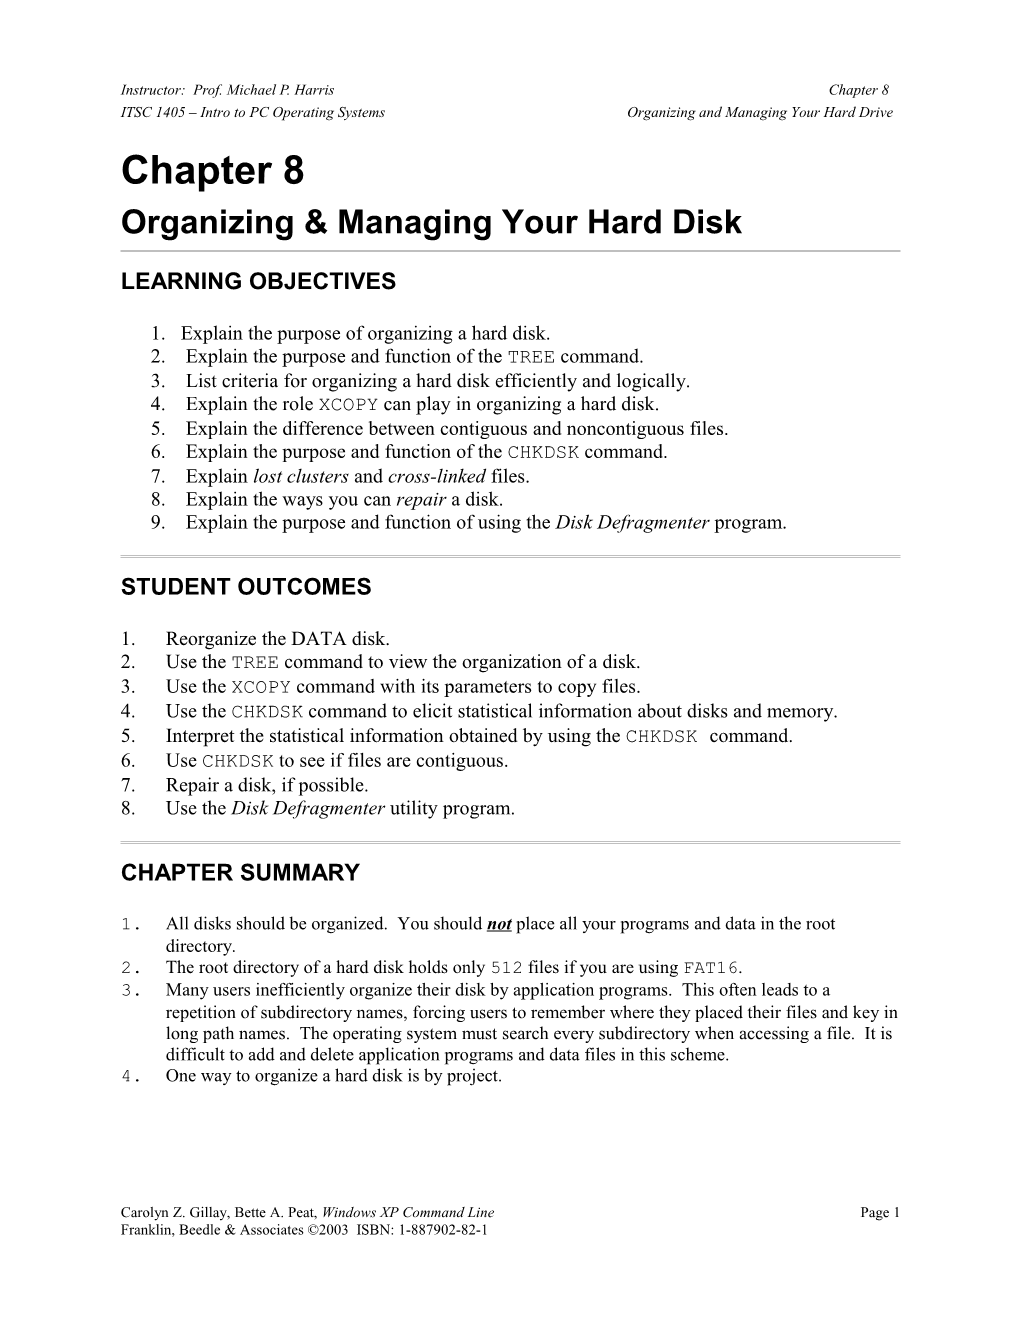 Ch 8 Organizing and Managing Your Hard Disk